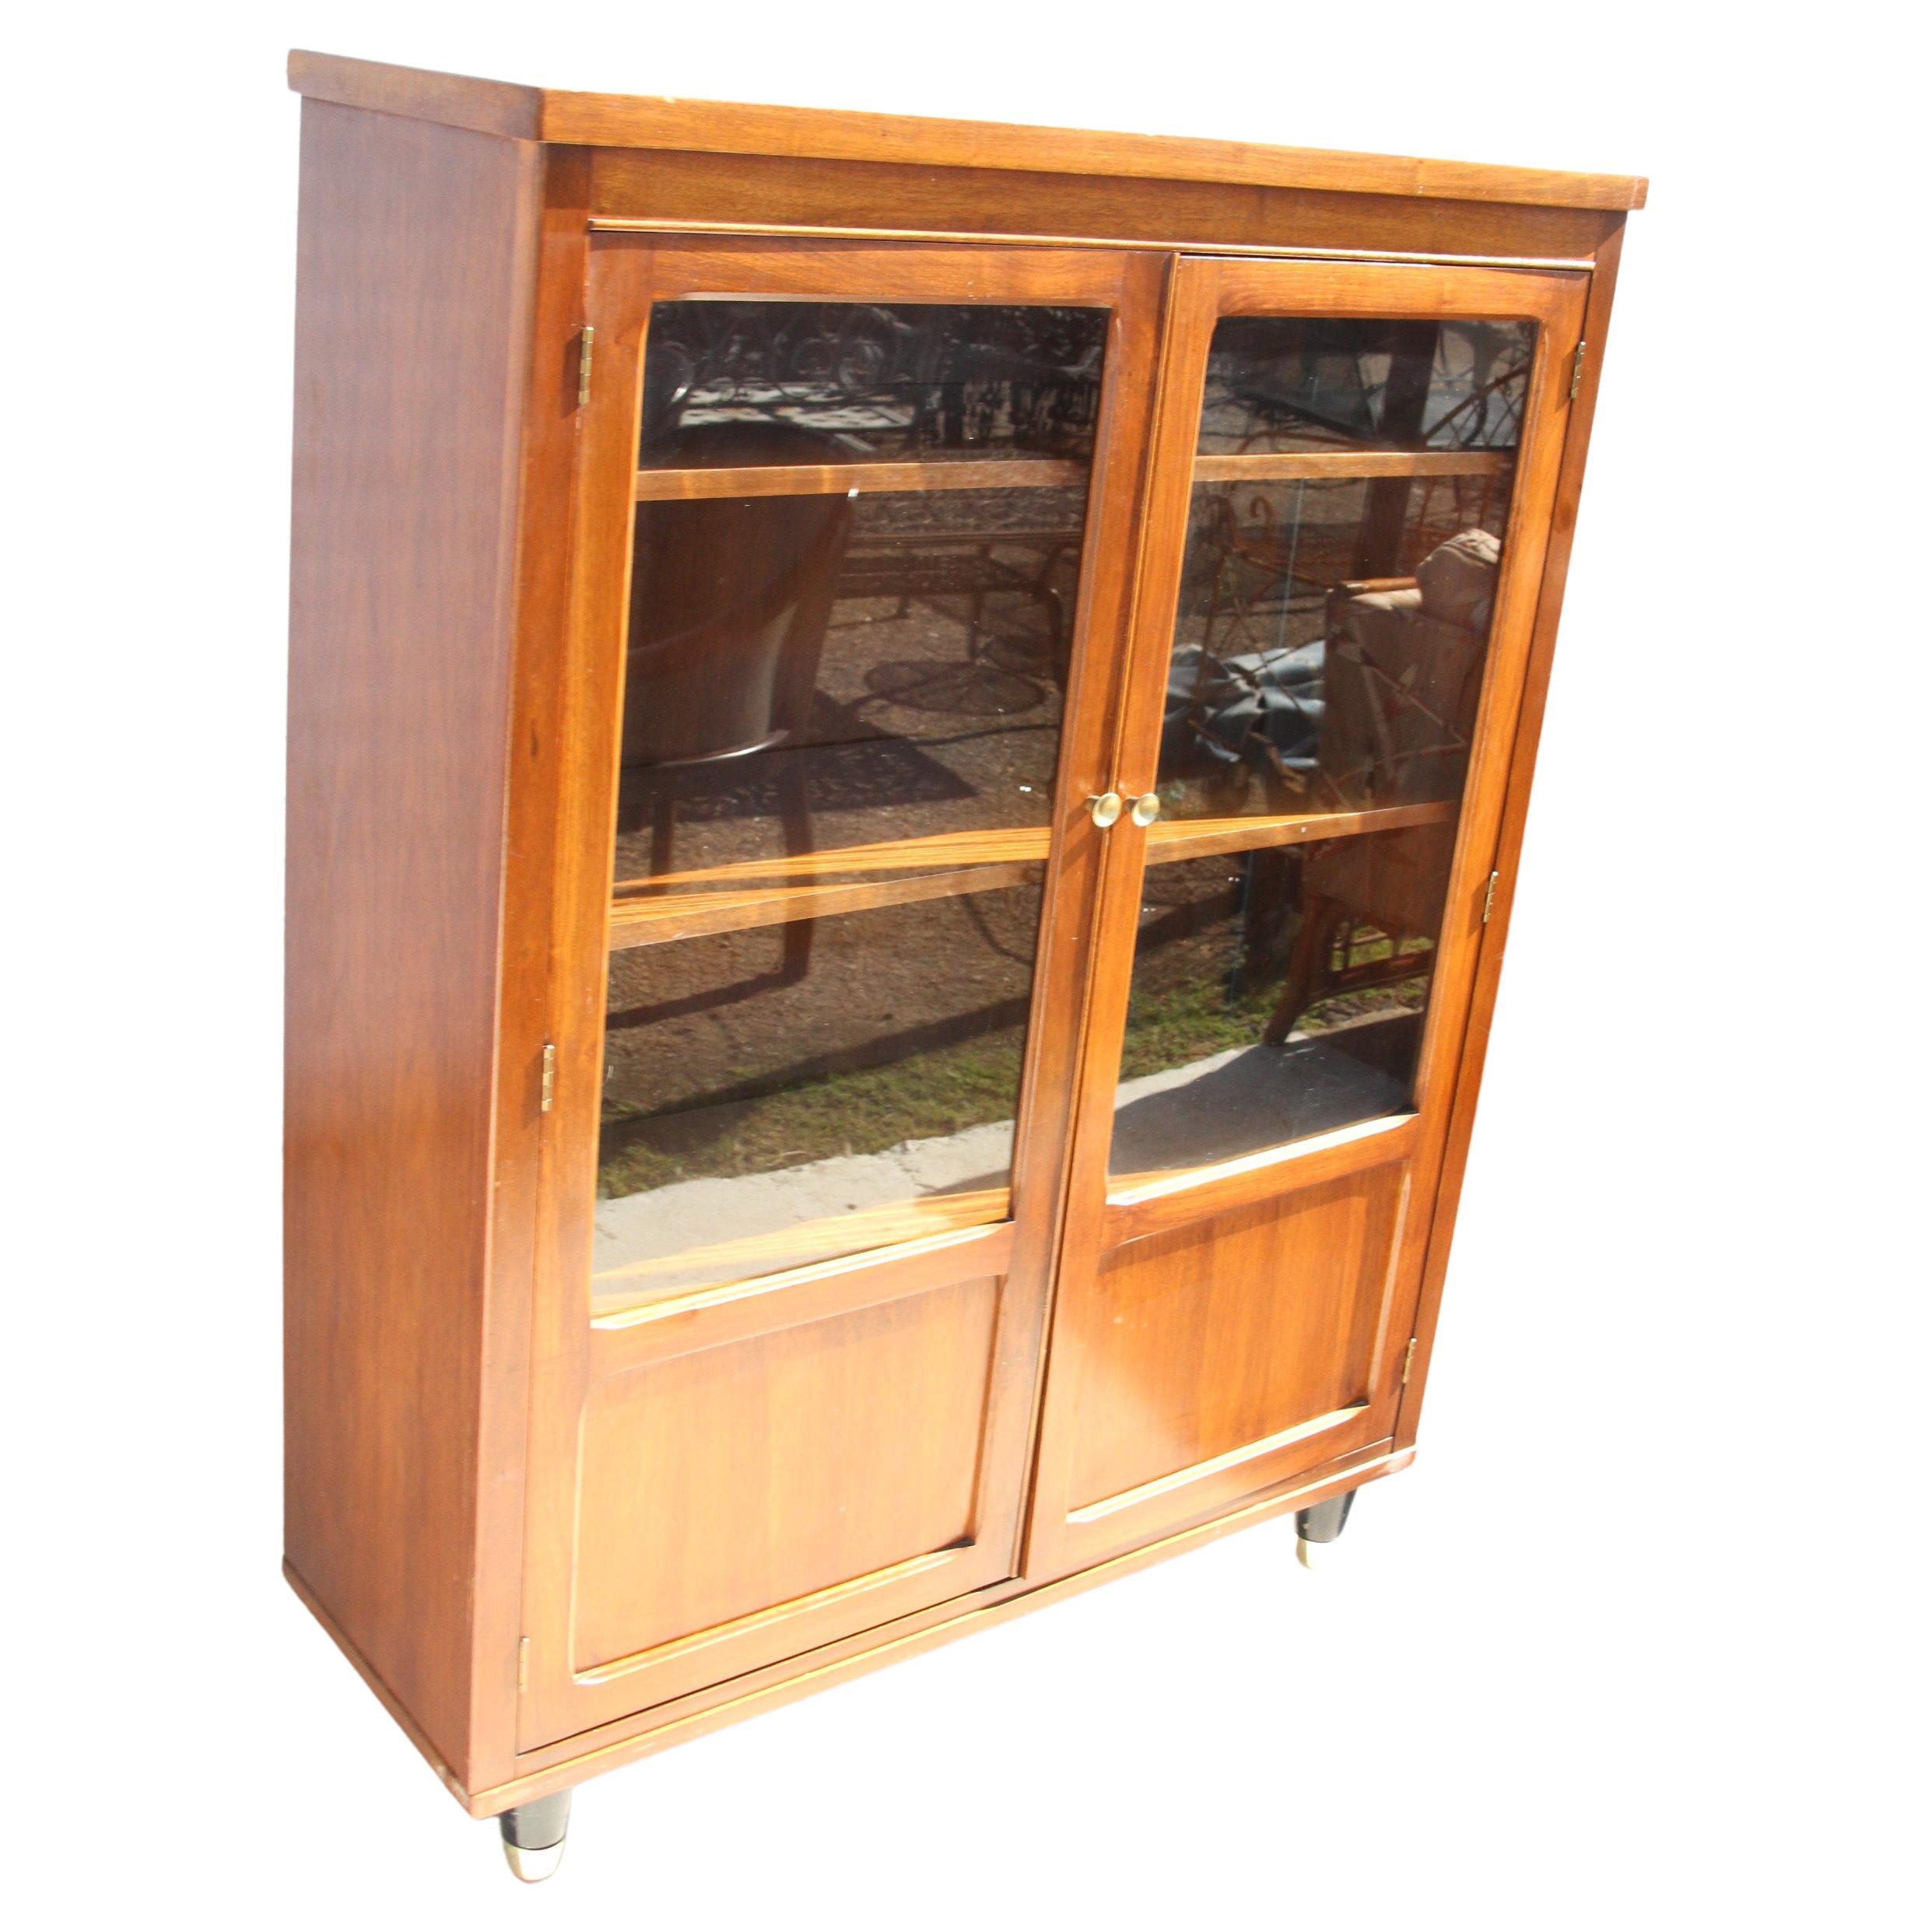 Midcentury Walnut Bookcase

Perfect for china, glass, bottles, books, etc. 
The cabinet has three shelves that can be placed in different positions 

The doors have integrated handles and the cabinet stands on tapered legs with brass caps. Brass